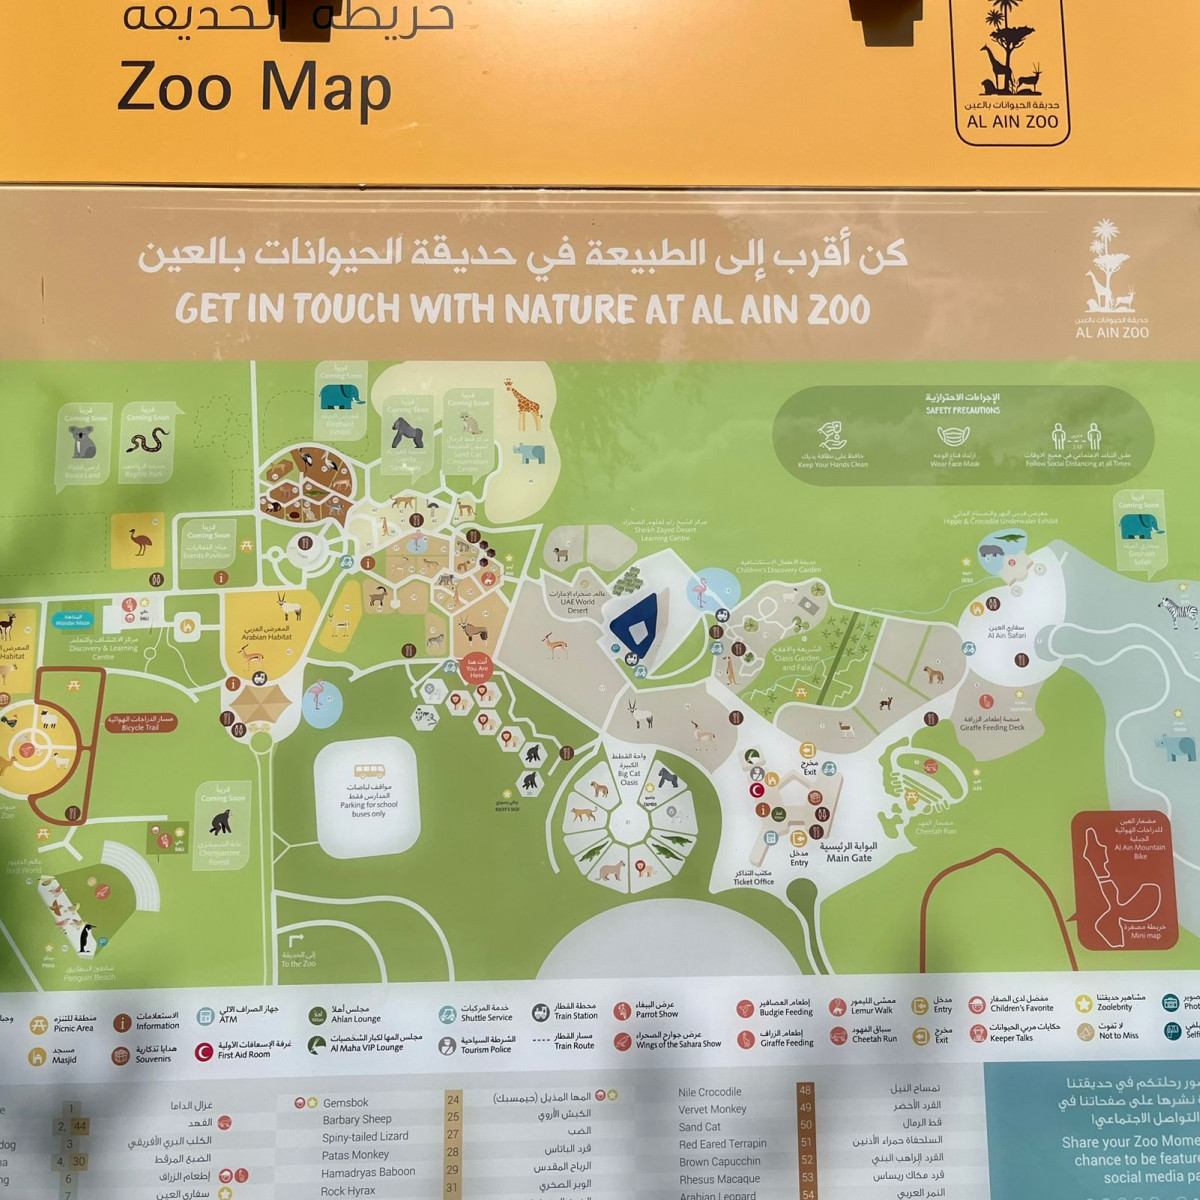 A site map at the Al Ain Zoo shows plans for the Elephant Safari as well as an additional Elephant Exhibit both 'coming soon'. [TNA]